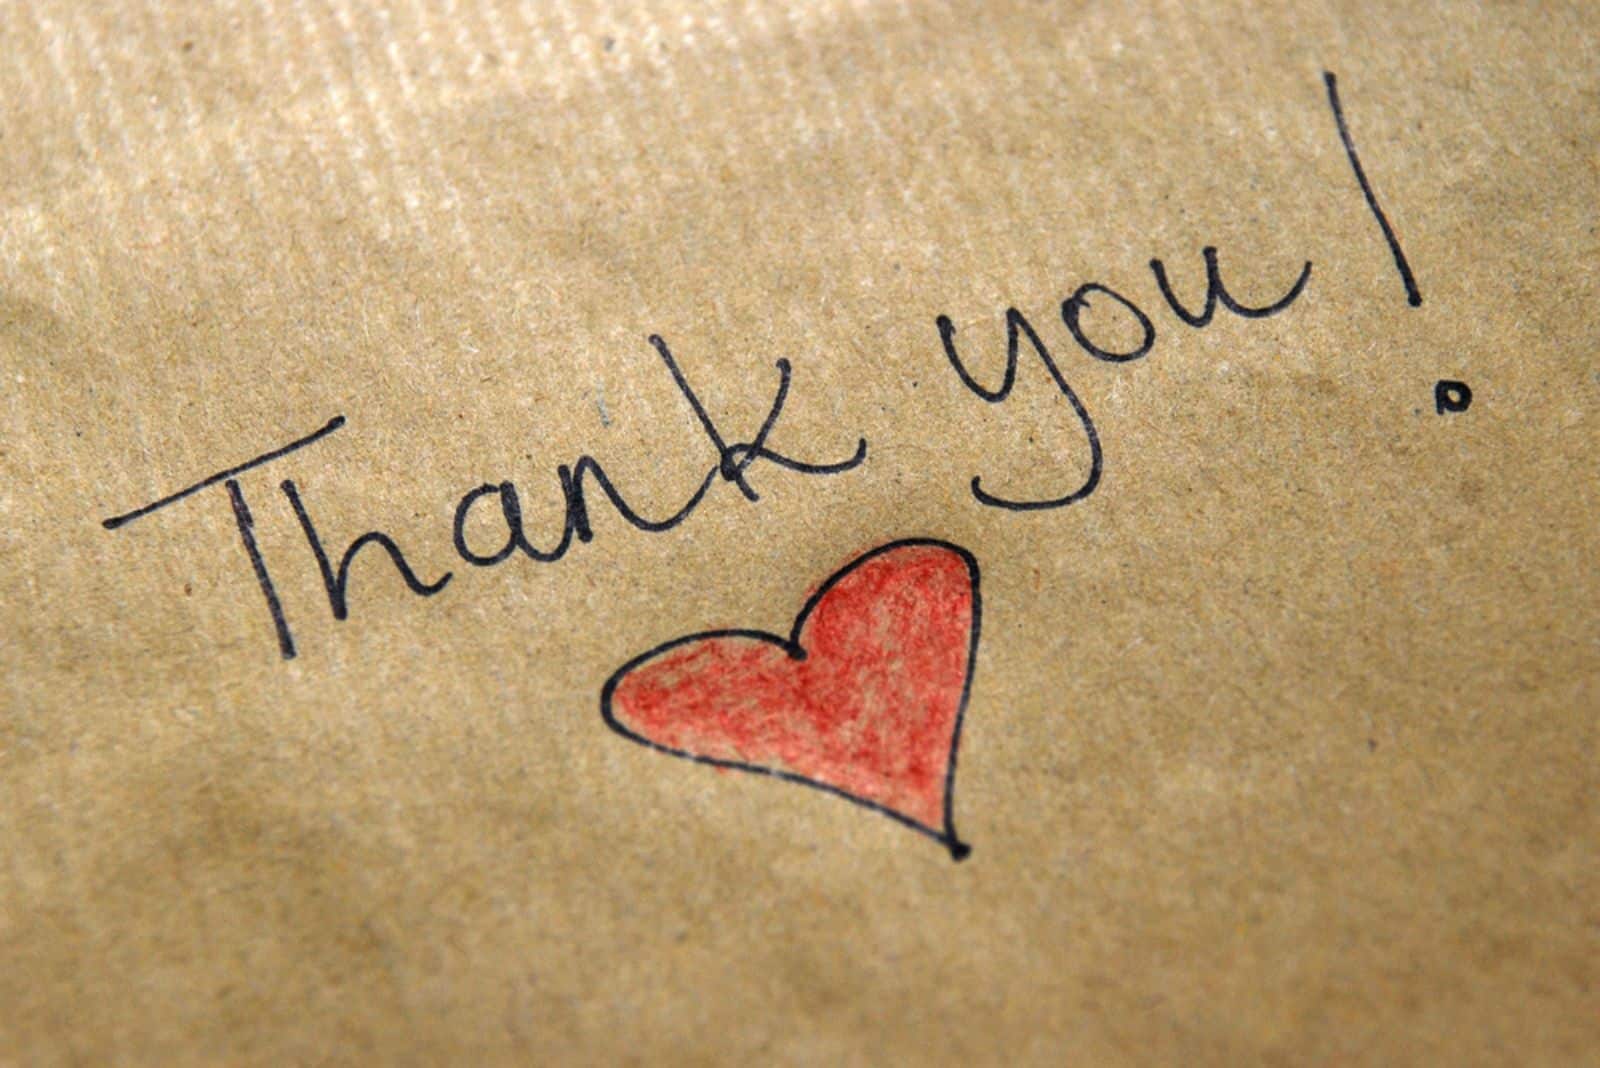 thank you written on the brown paper with red heart